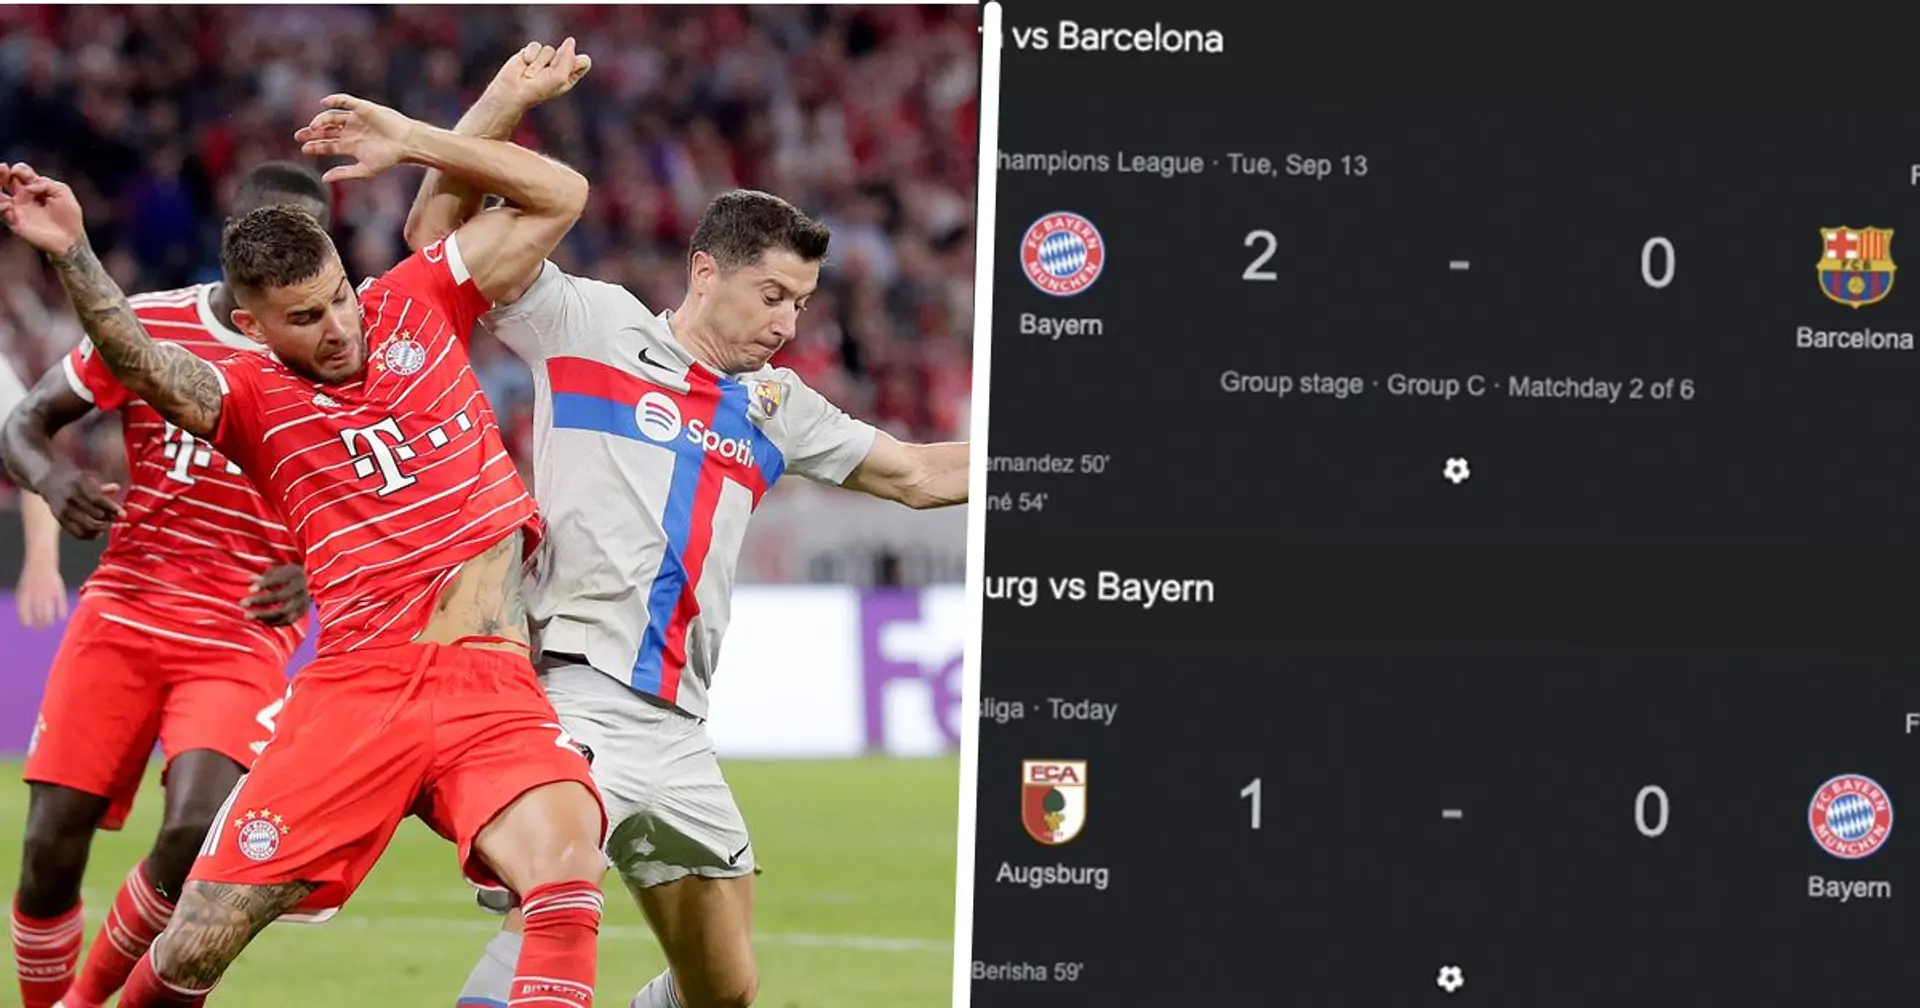 Bayern loses to 11th-place team in Bundesliga after beating Barca, now winless in 4 domestic games